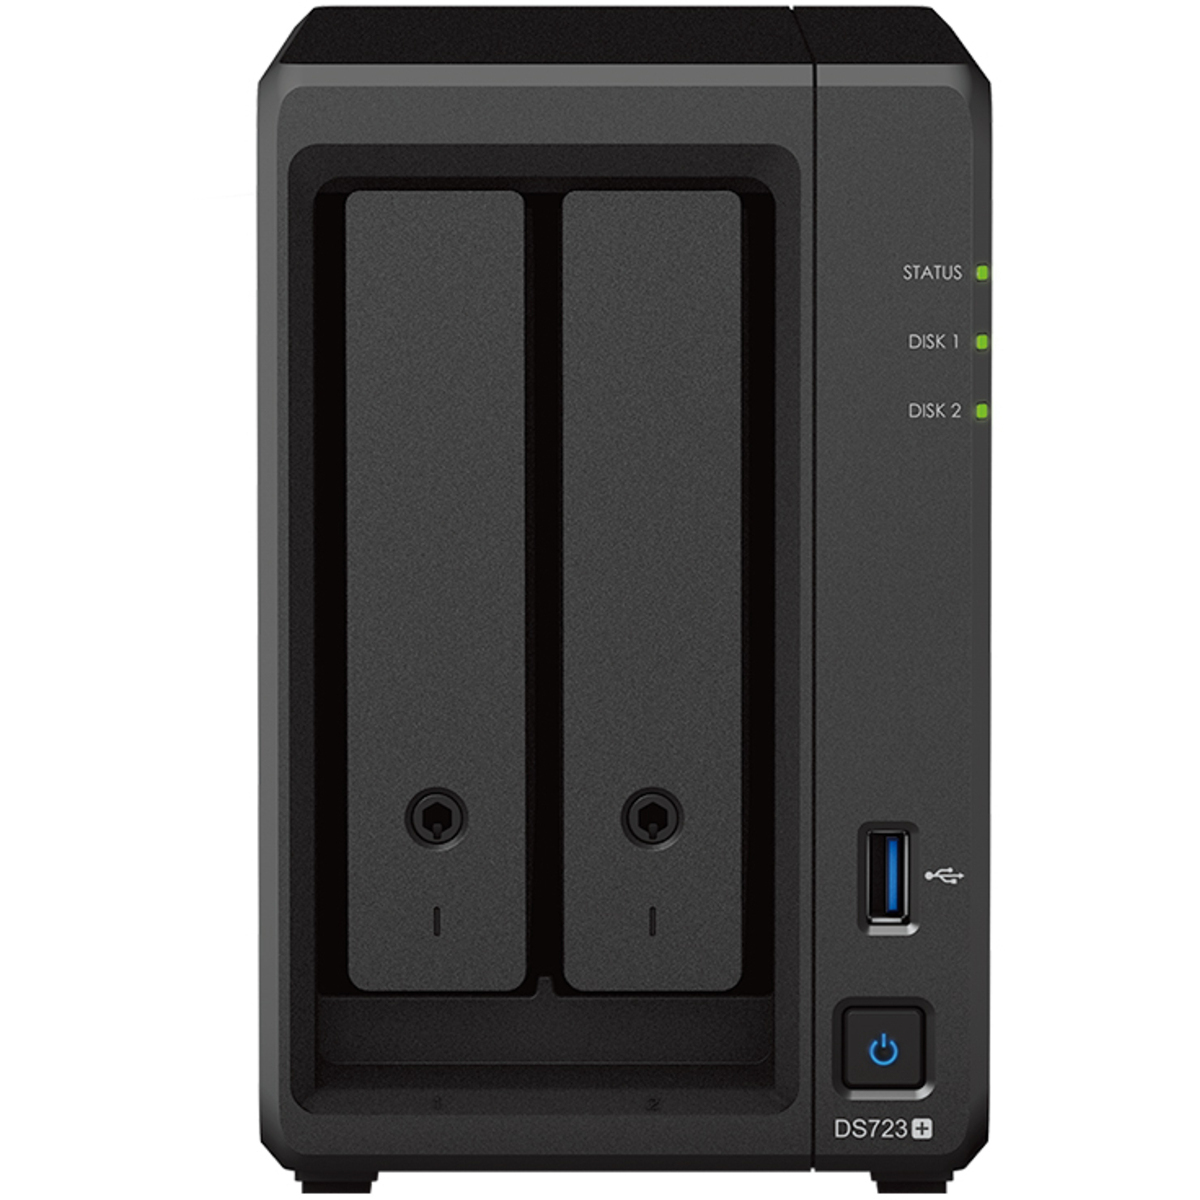 Synology DiskStation DS723+ 4tb 2-Bay Desktop Multimedia / Power User / Business NAS - Network Attached Storage Device 2x2tb Western Digital Red Pro WD2002FFSX 3.5 7200rpm SATA 6Gb/s HDD NAS Class Drives Installed - Burn-In Tested DiskStation DS723+